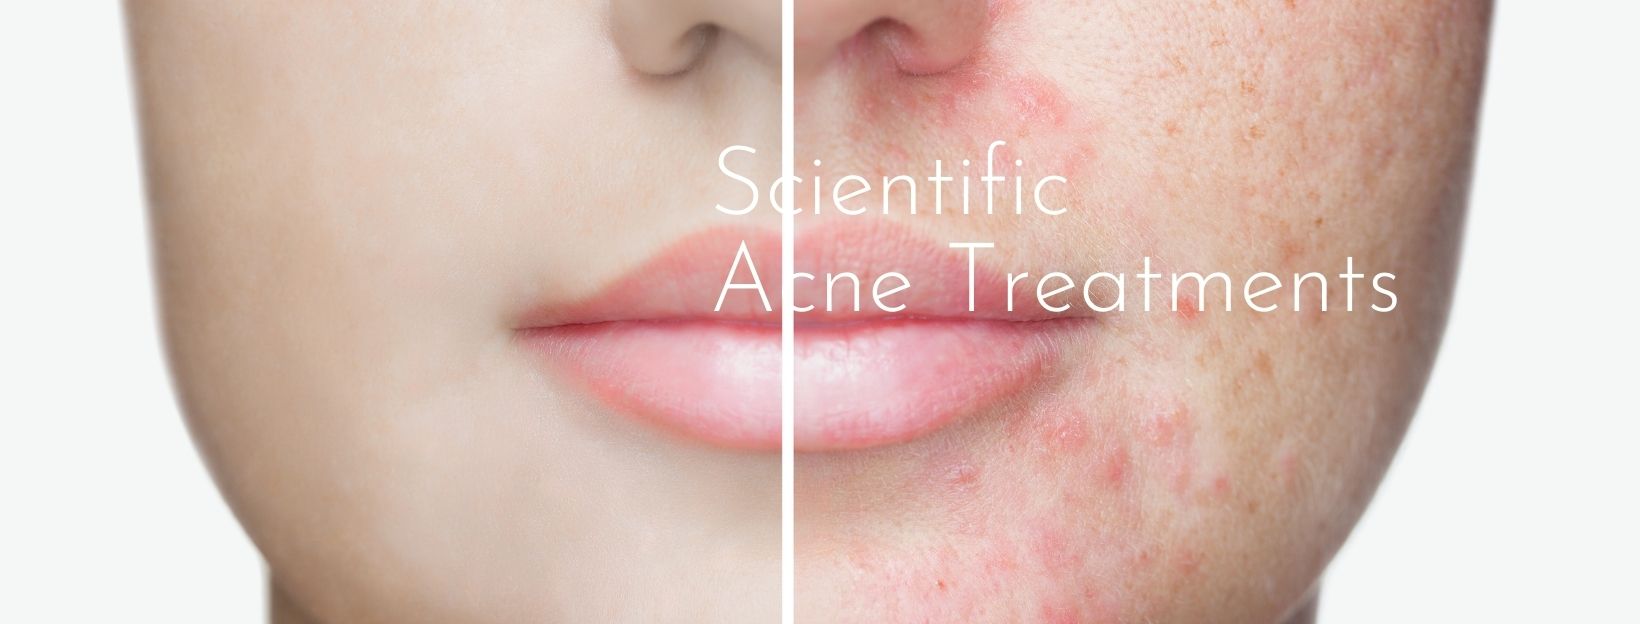 skin treatment for acne